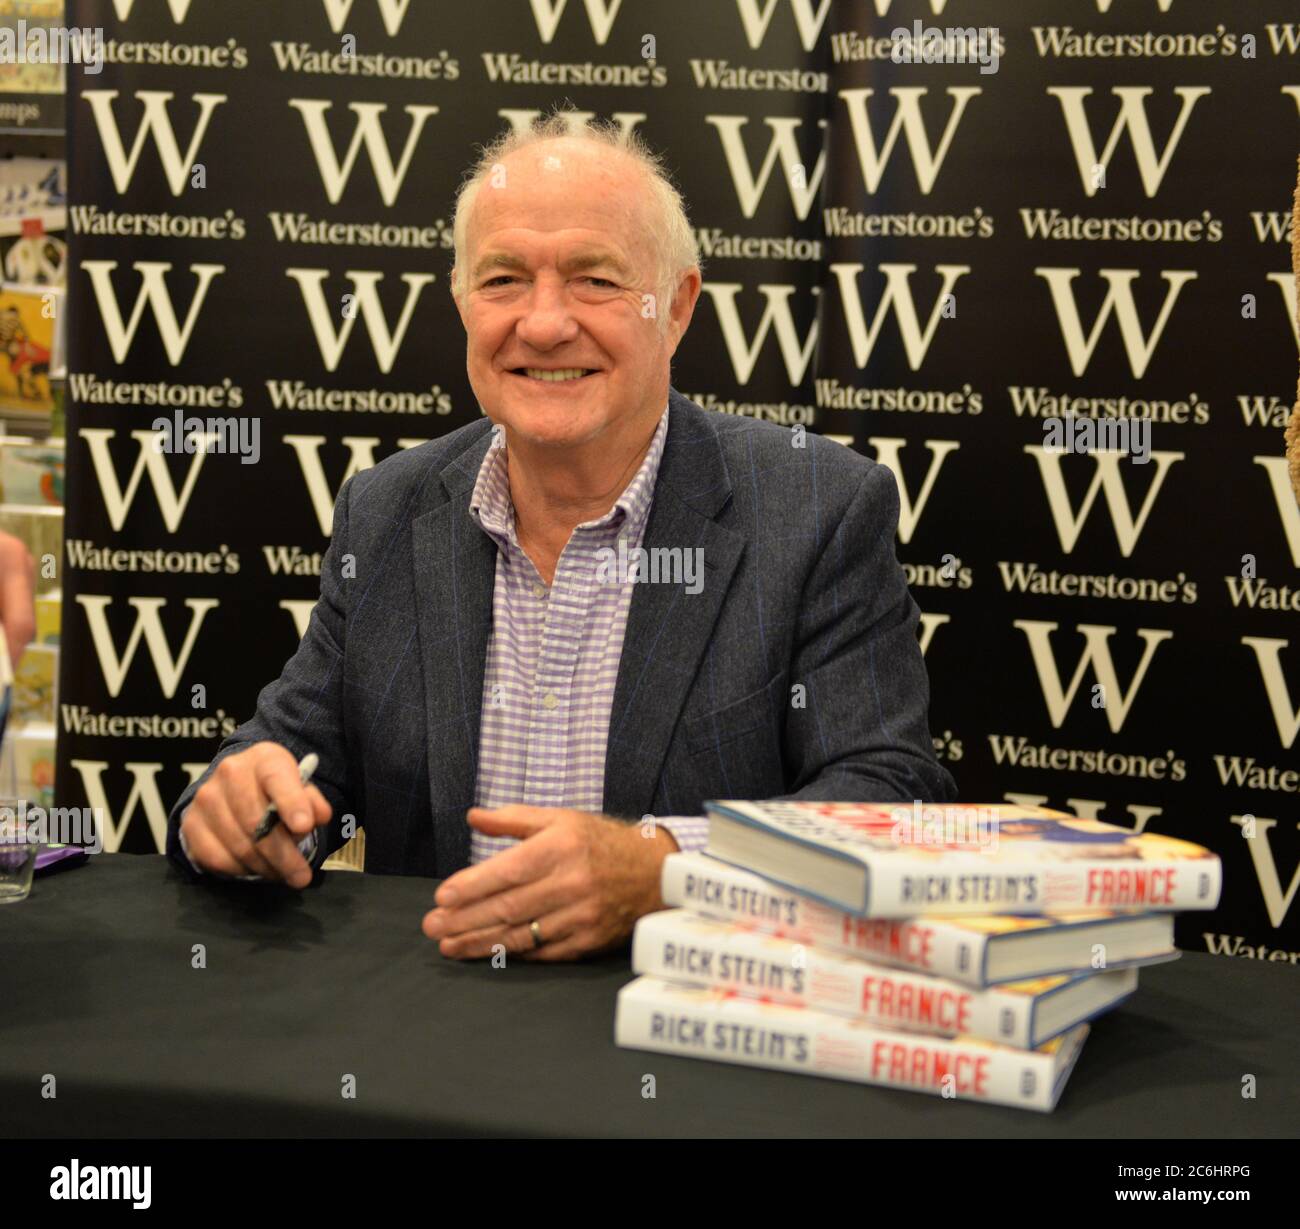 Rick Stein, British chef, restaurateur and presenter signs copies of Rick Stein's Secret France, a collection of 120 new recipes for real and simple F Stock Photo